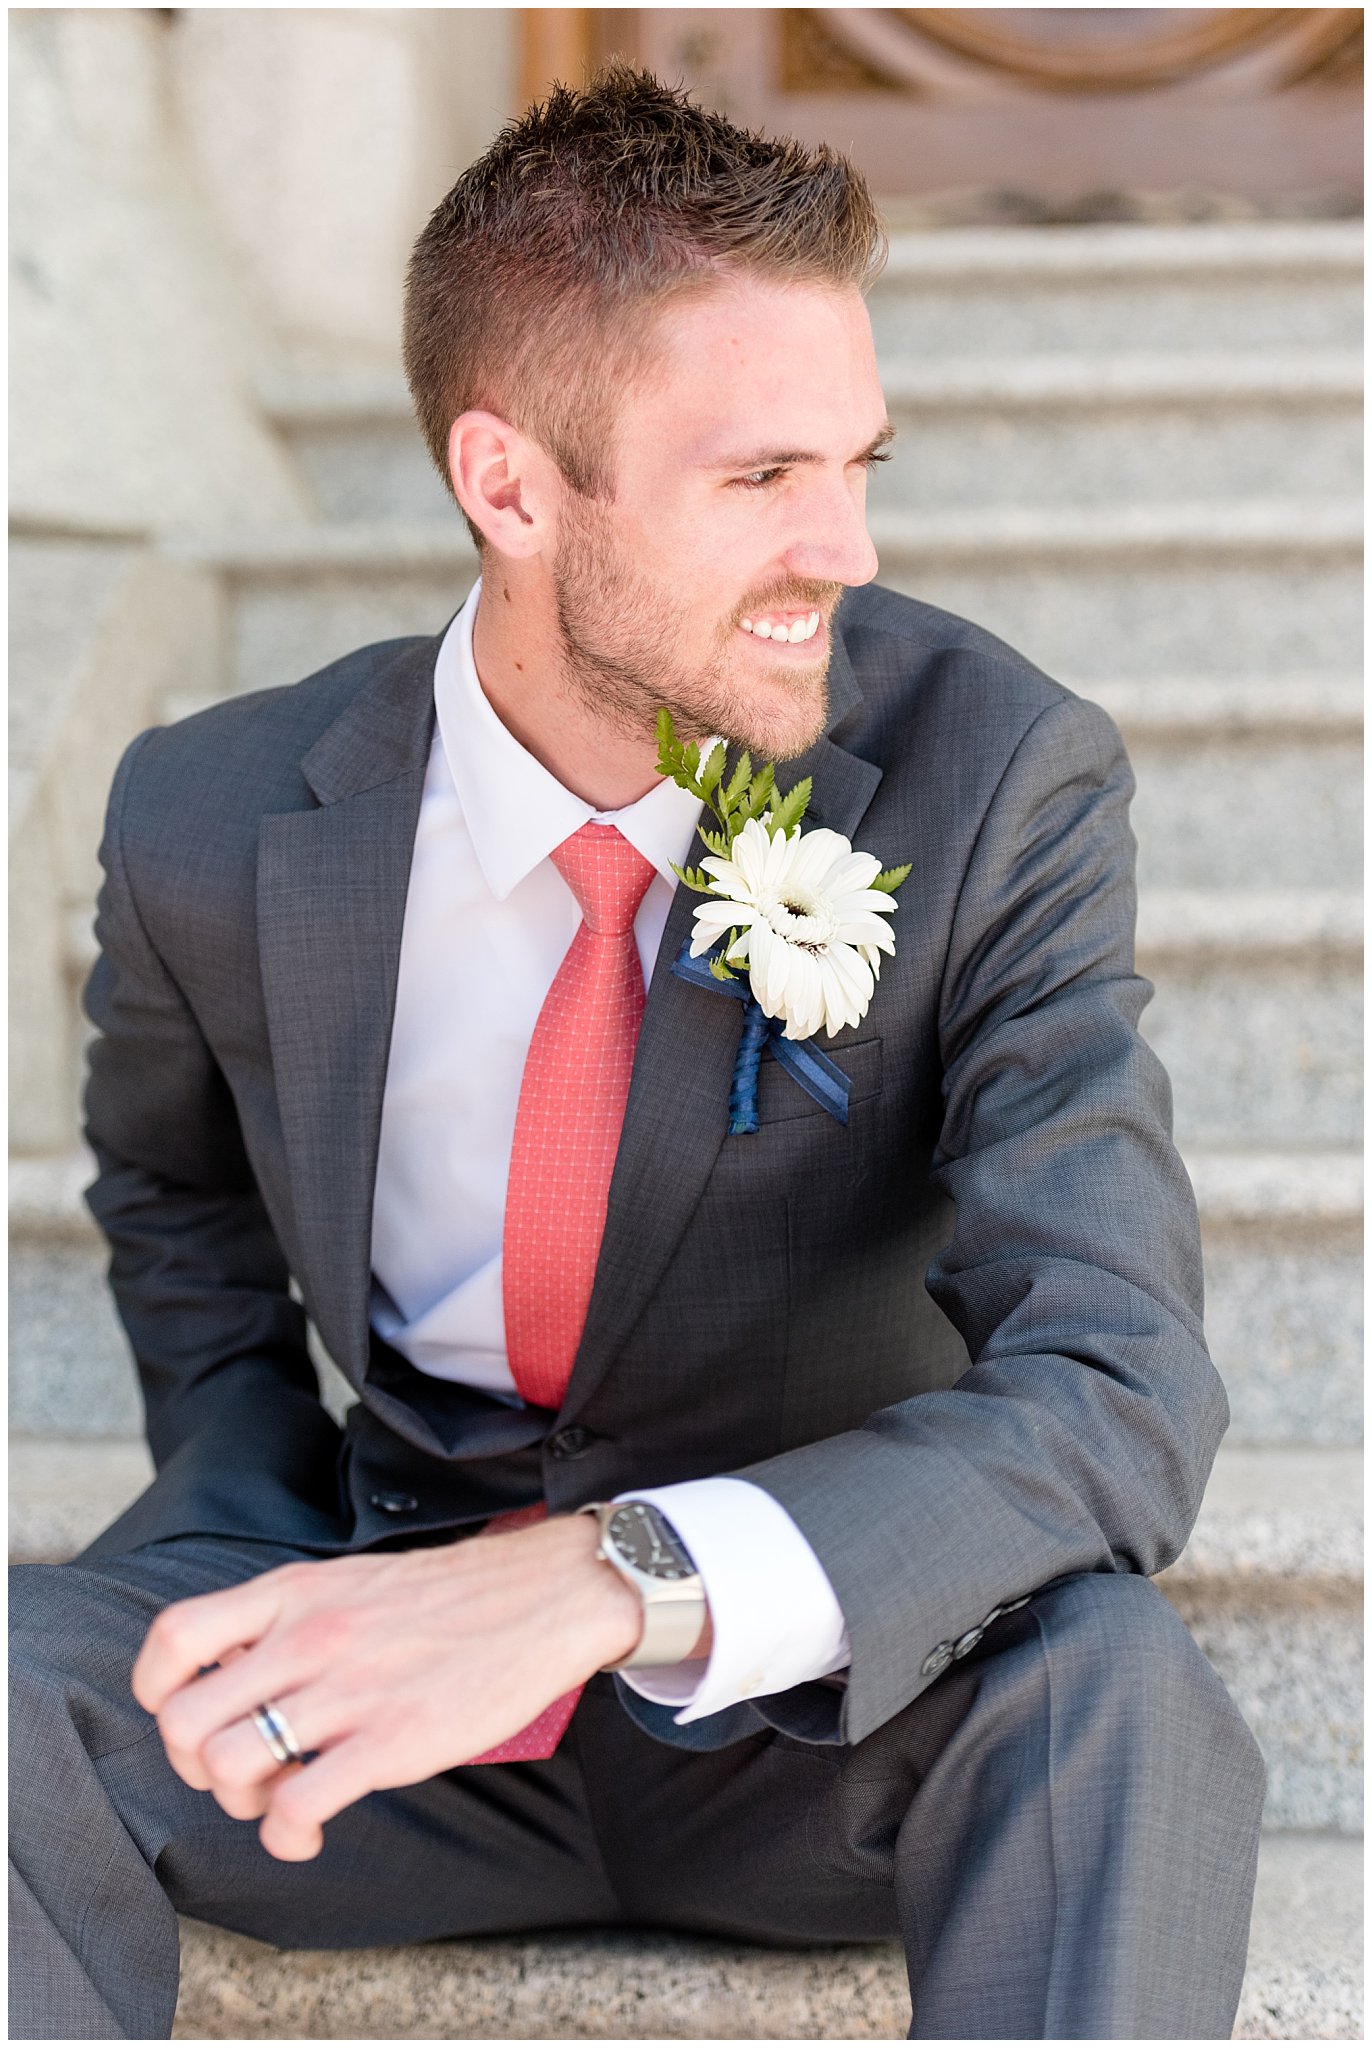 Salt Lake Temple spring wedding | Coral and grey wedding | groom pictures on the stairs